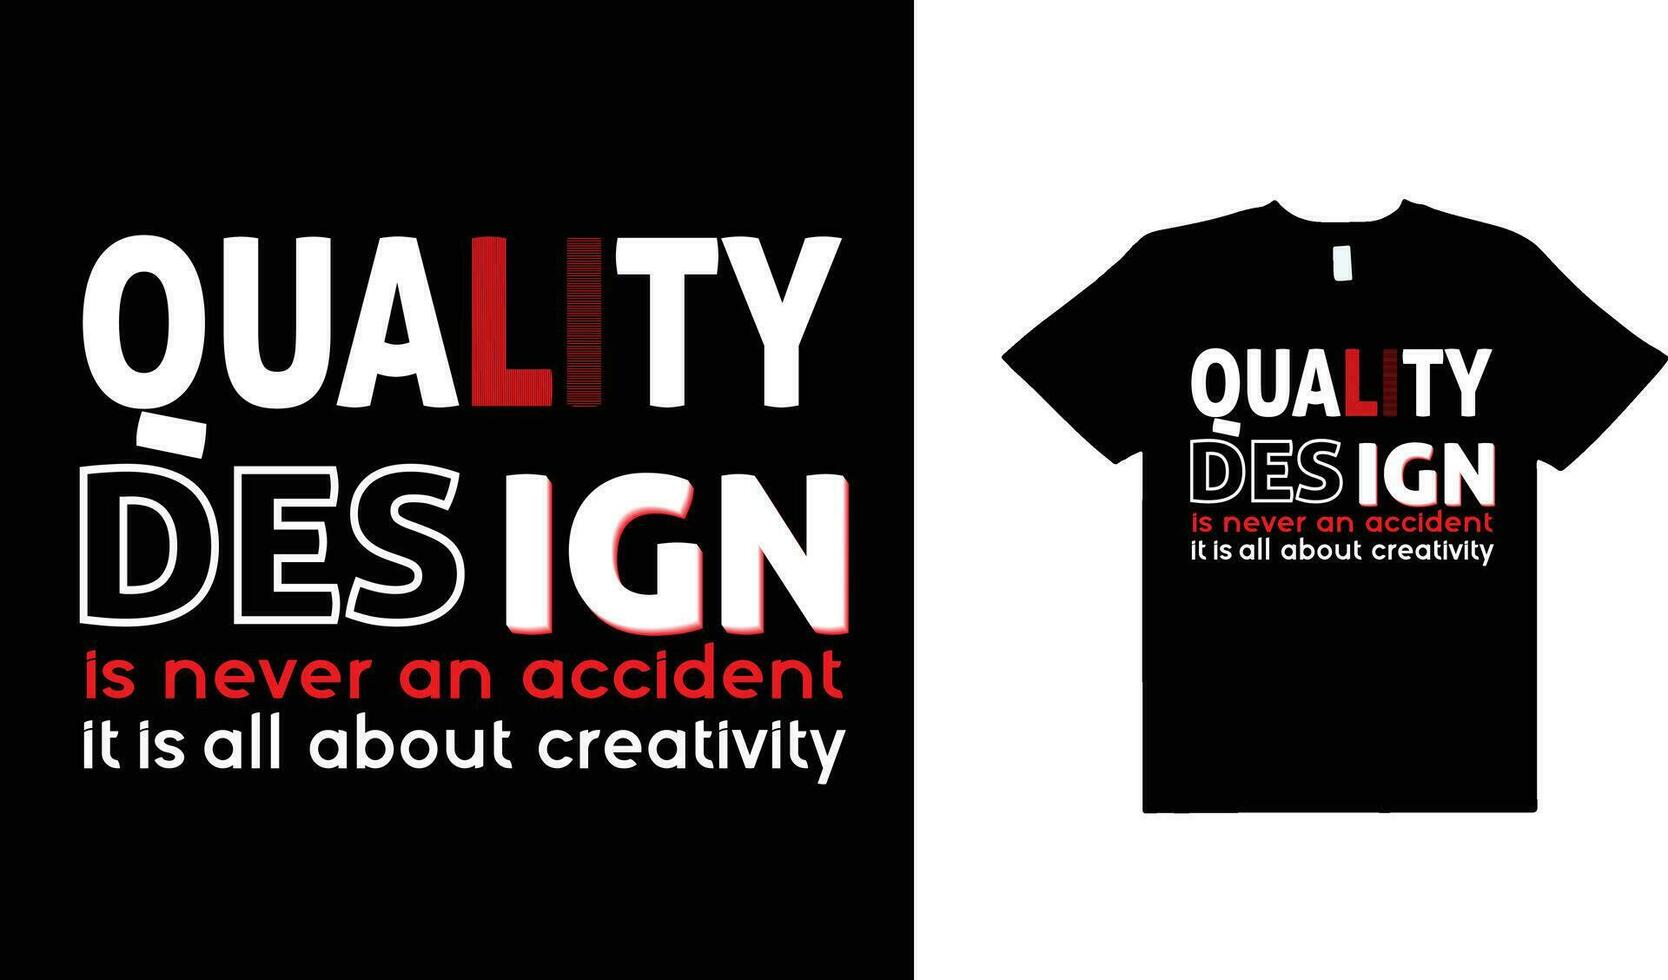 QUALITY DESIGN TYPOGRAPHY GRAPHIC T-SHIRT DESIGN,TYPOGRAPHIC T-SHIRT DESIGN. vector